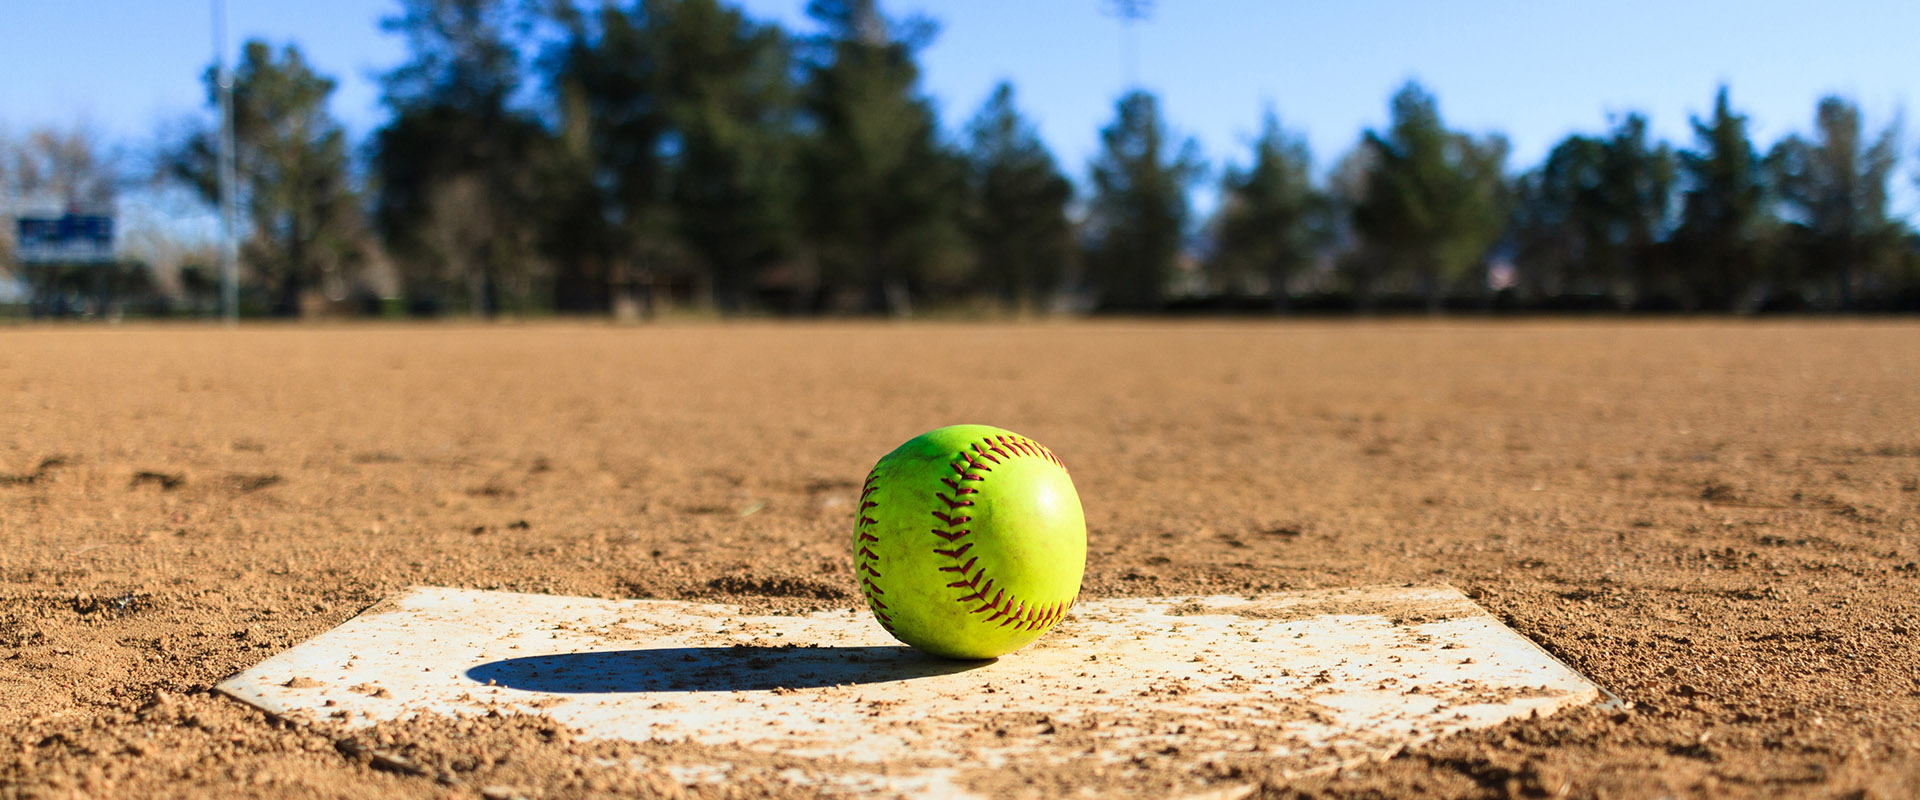 How to prepare for your Softball game